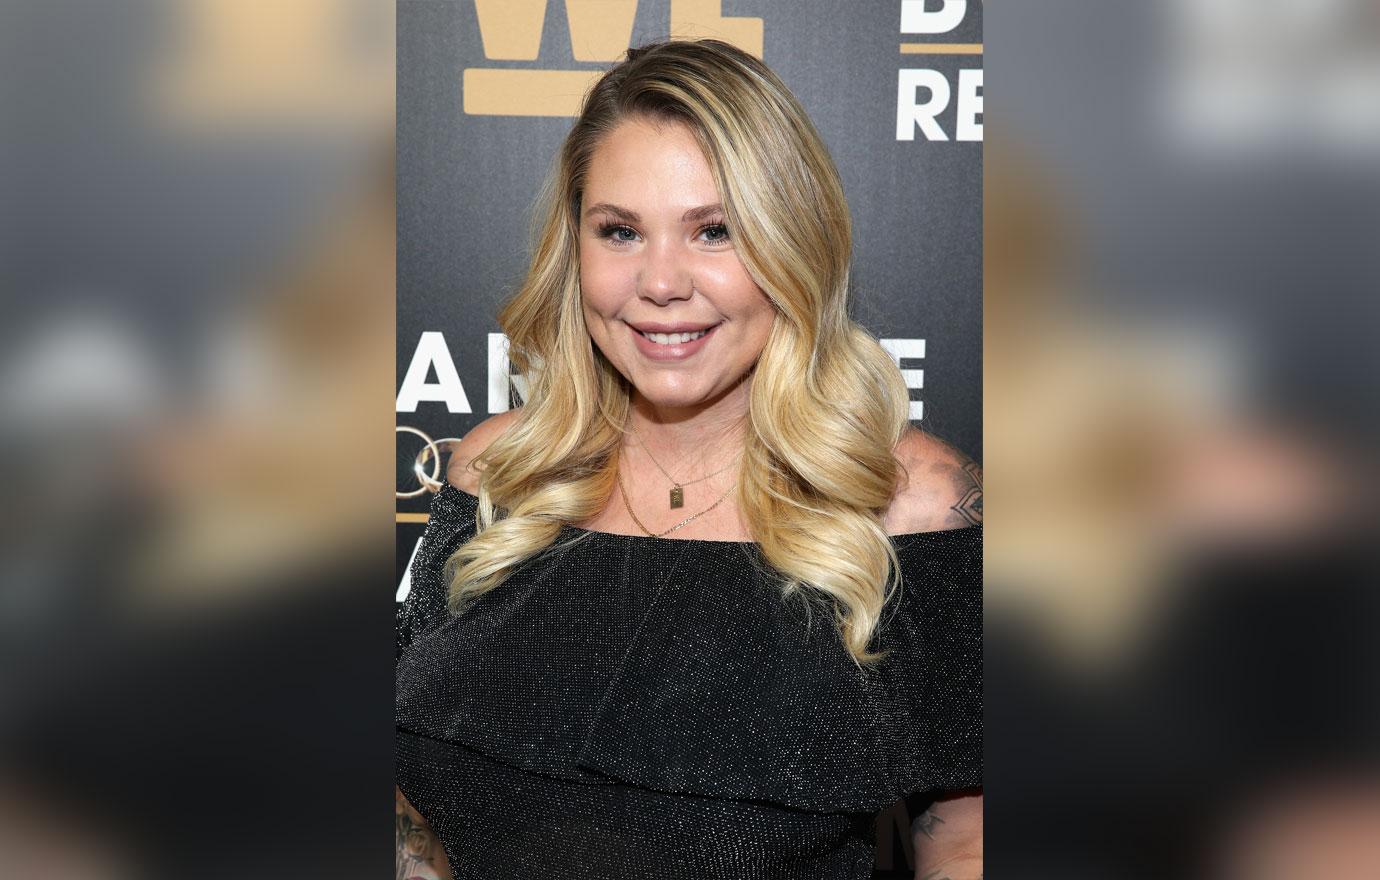 Kailyn Lowry Parties With Pals After Posing Naked For Her 27th Birthday 